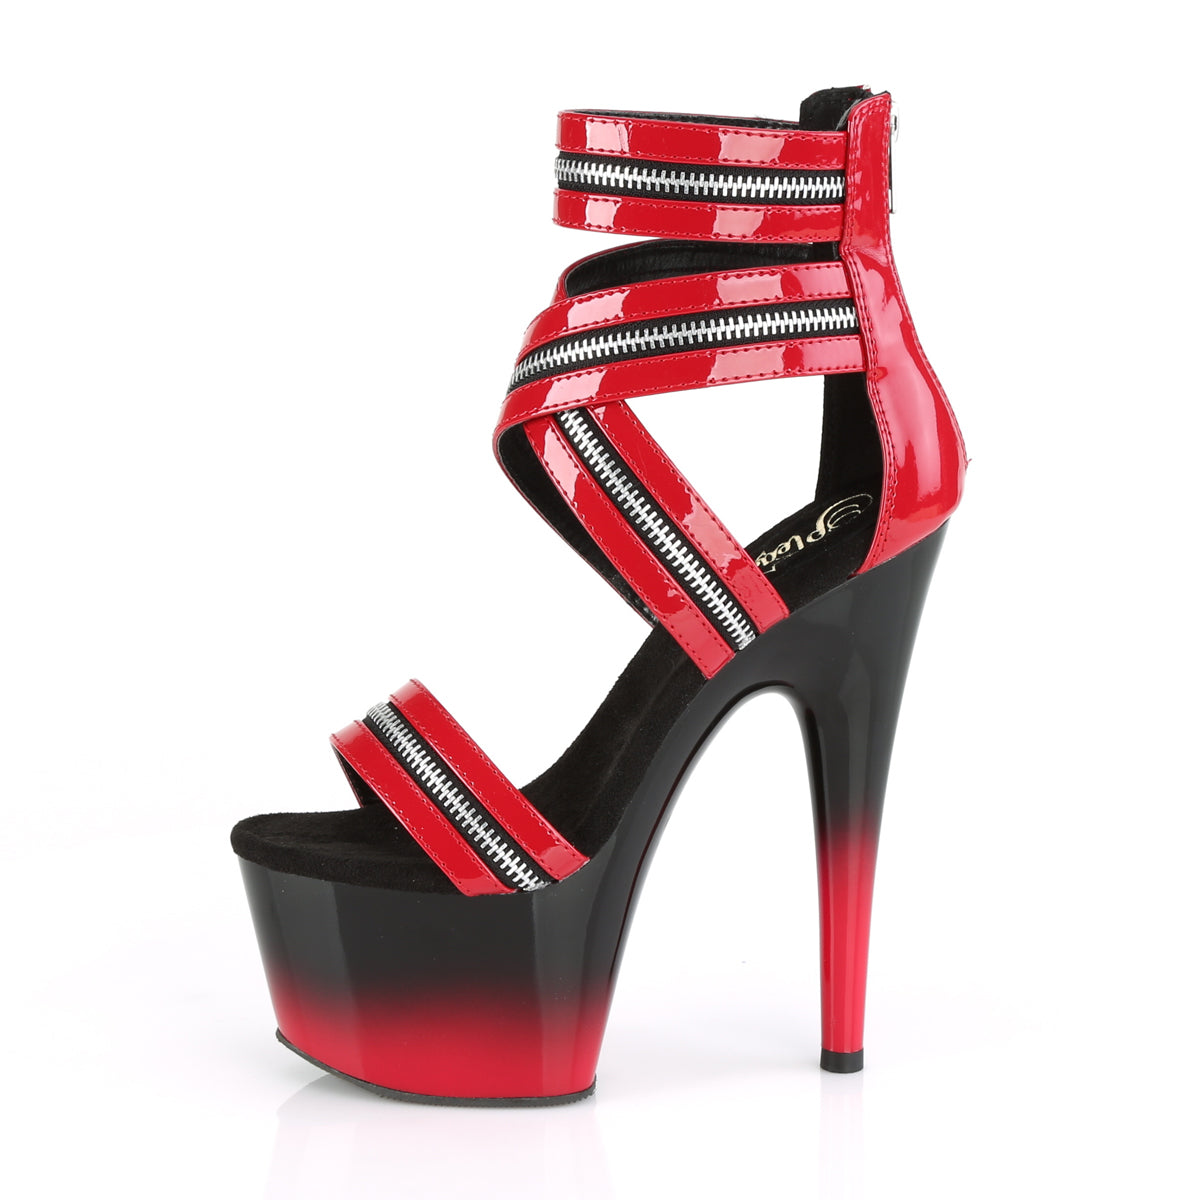 PLEASER ADORE-766 RED BLACK ZIPPER STRAPPY 7 INCH HIGH HEEL PLATFORM SHOES SIZE 8 SALE